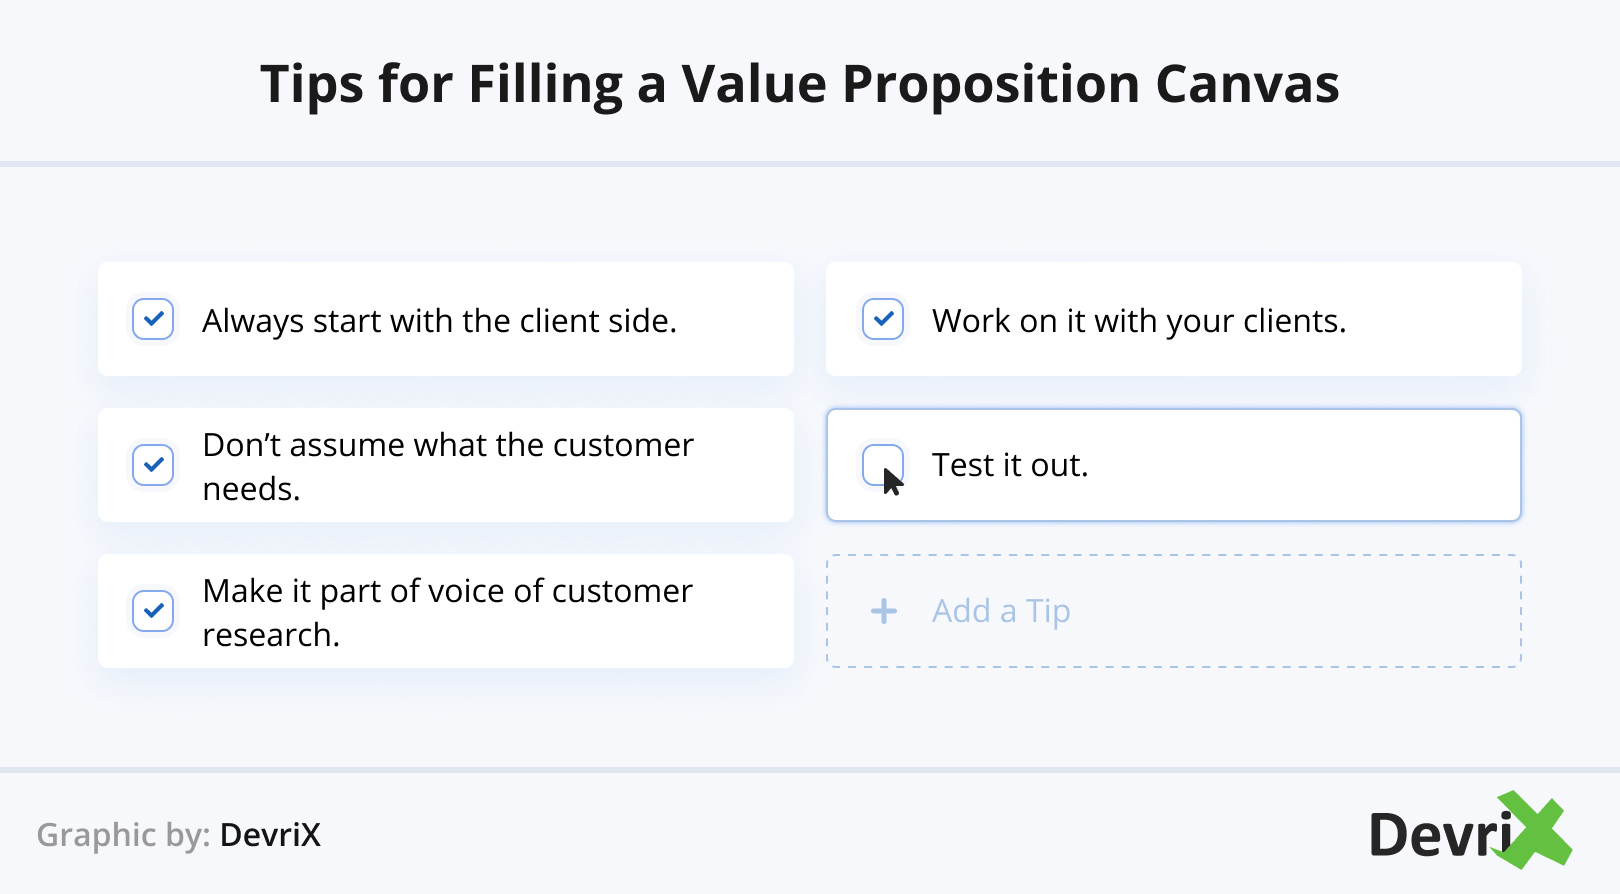 Tips for Filling a Value Proposition Canvas